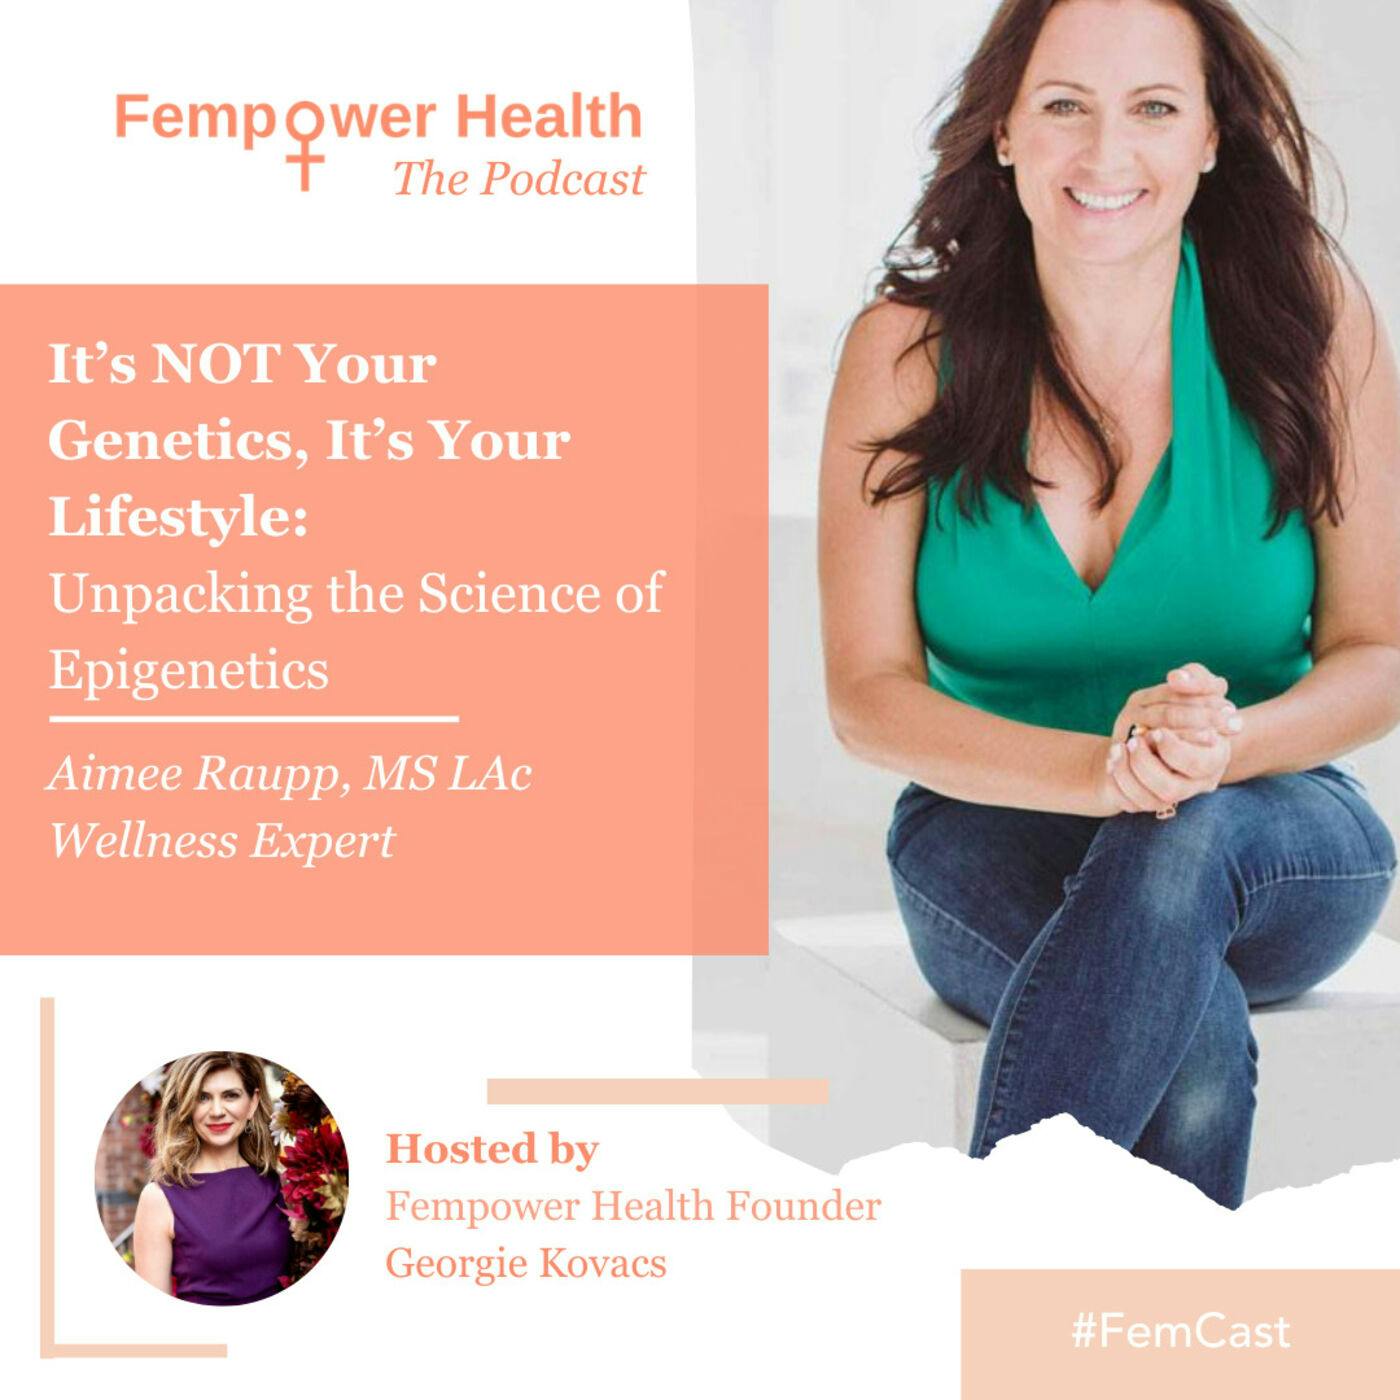 Aimee Raupp | It’s NOT Your Genetics, It’s Your Lifestyle: Unpacking the Science of Epigenetics